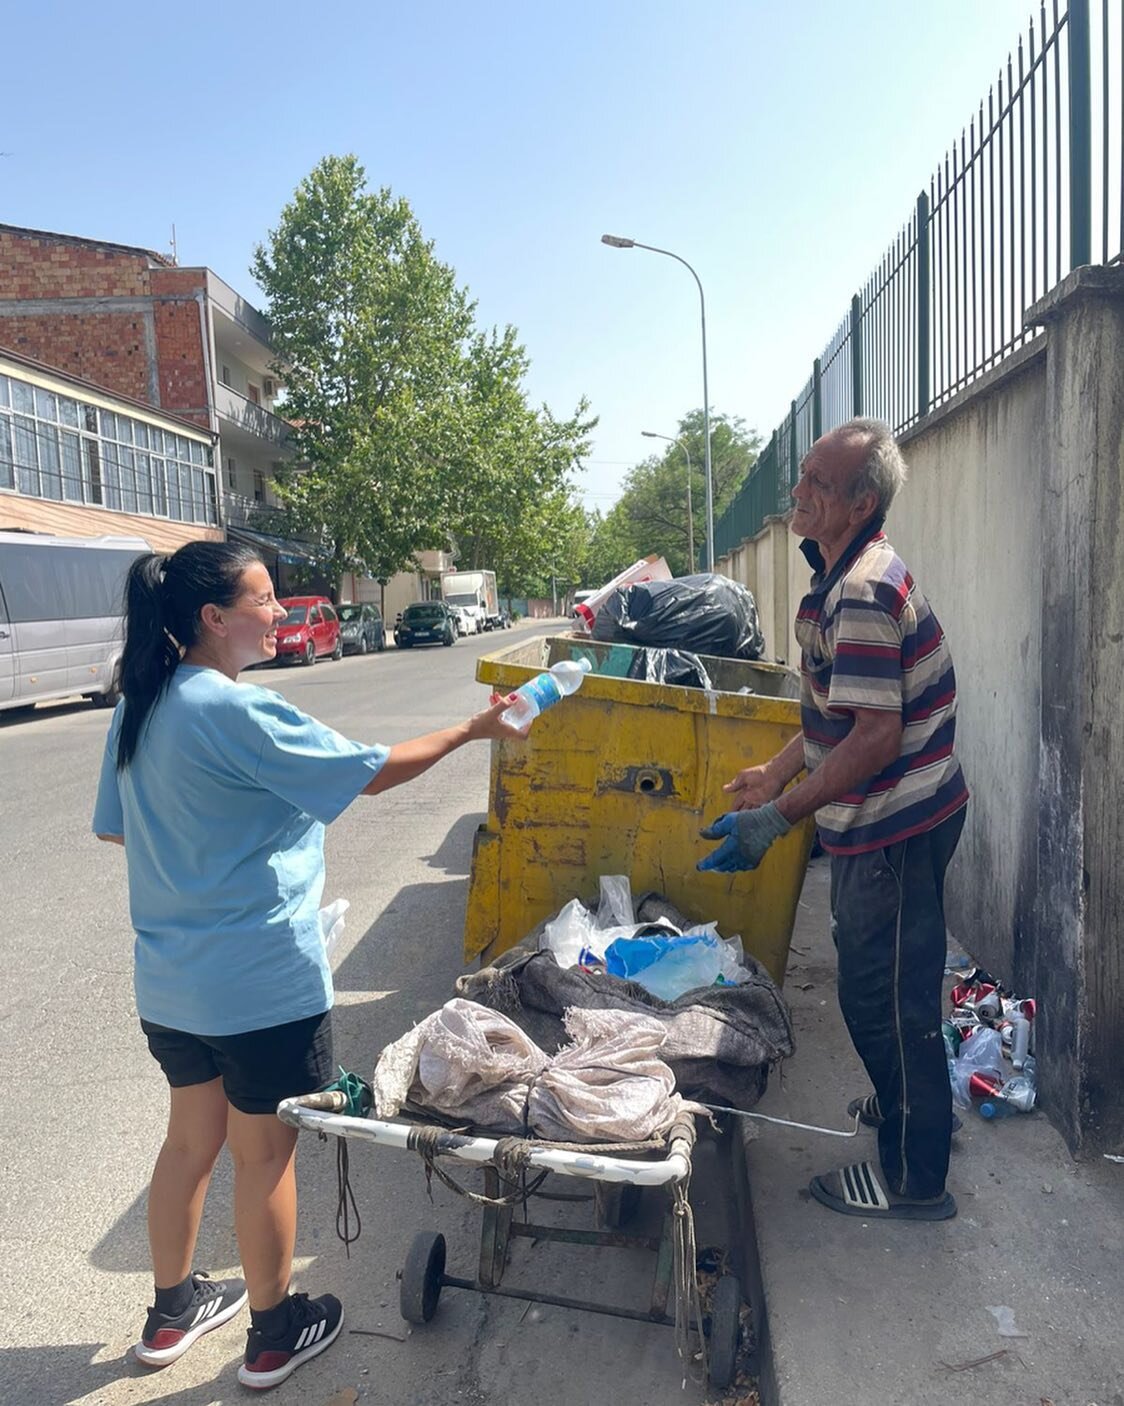 35C today, and it was a joy to hit the streets and hand out bottles of cold water to neighbours in our community. #steppingout #lovingothers #wearetekura #blessing